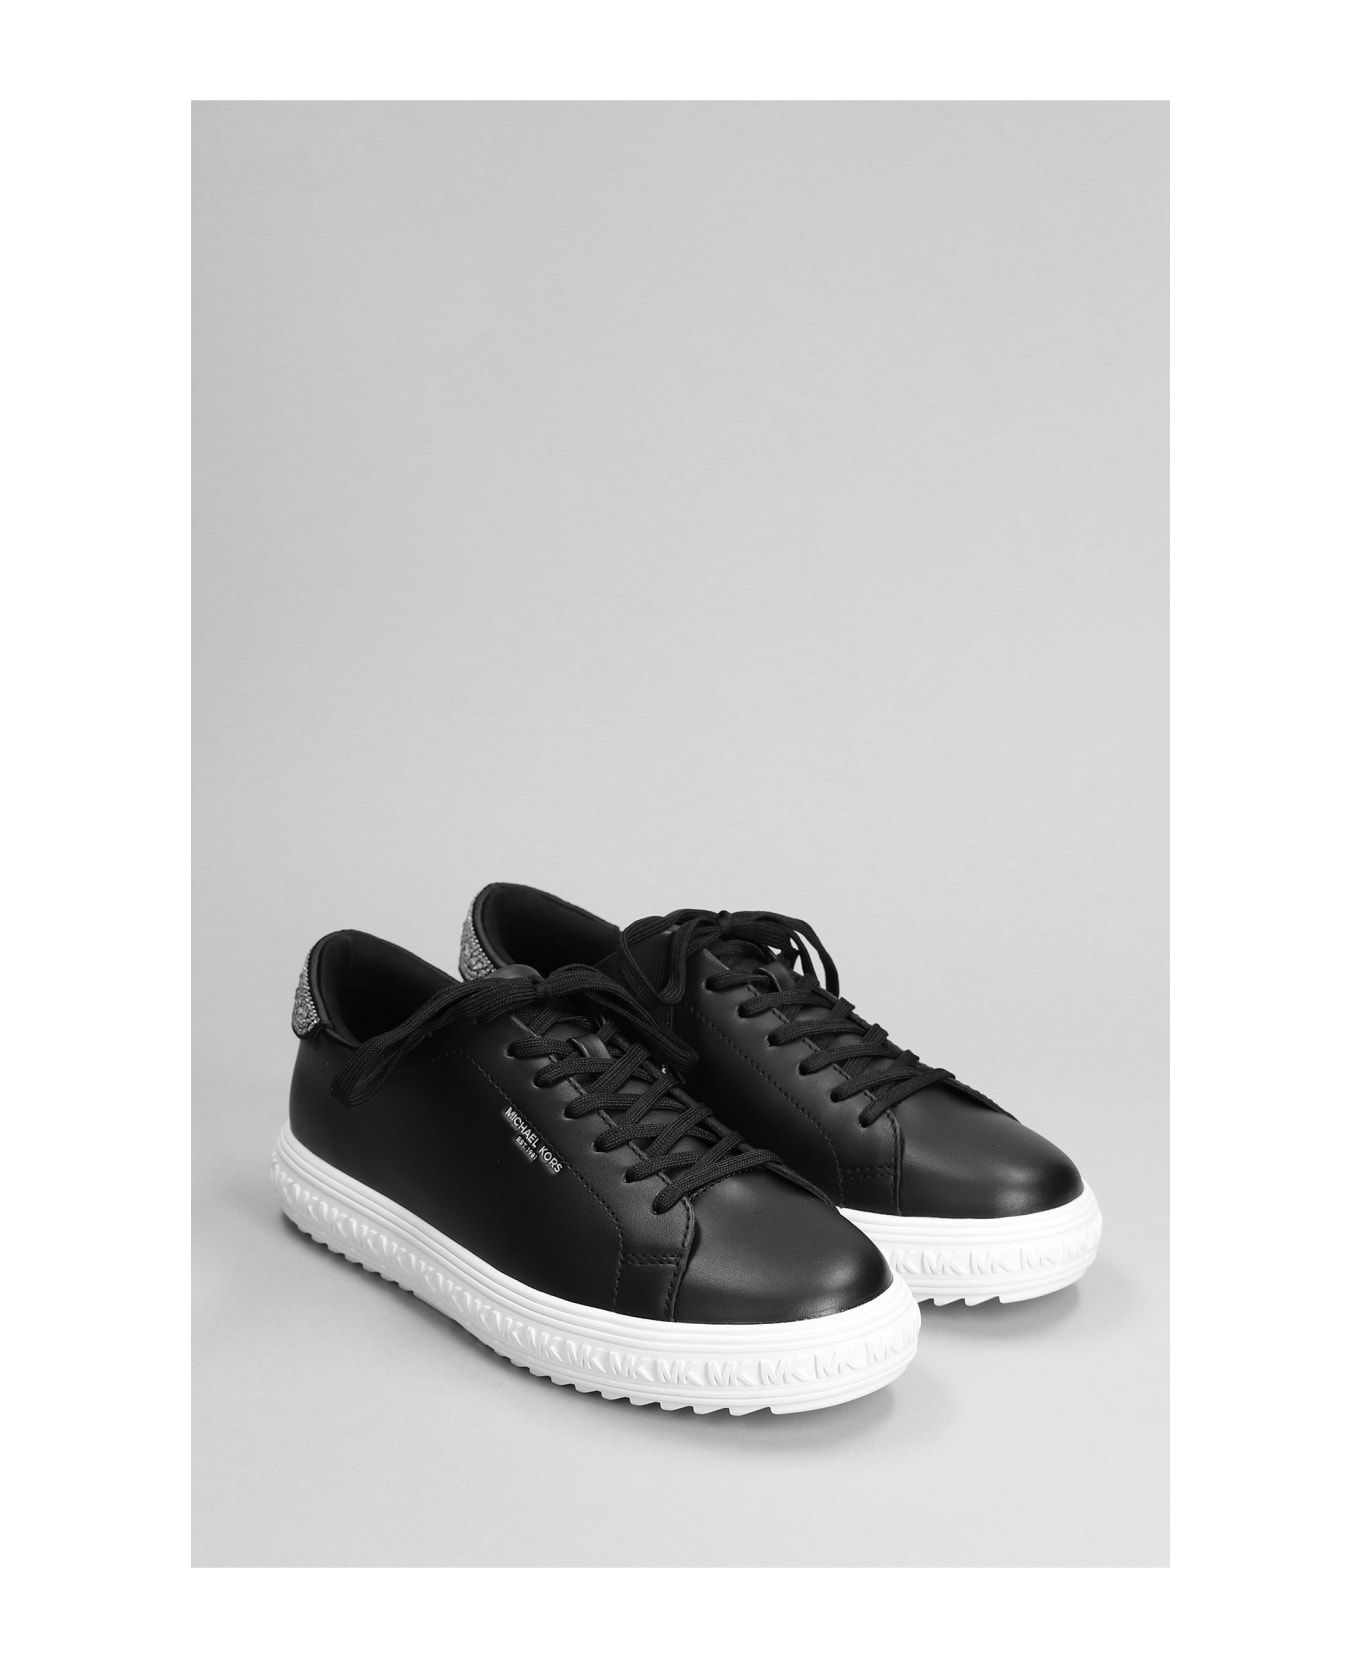 Michael Kors Grove Lake Up Sneakers In Black Leather And Fabric - black